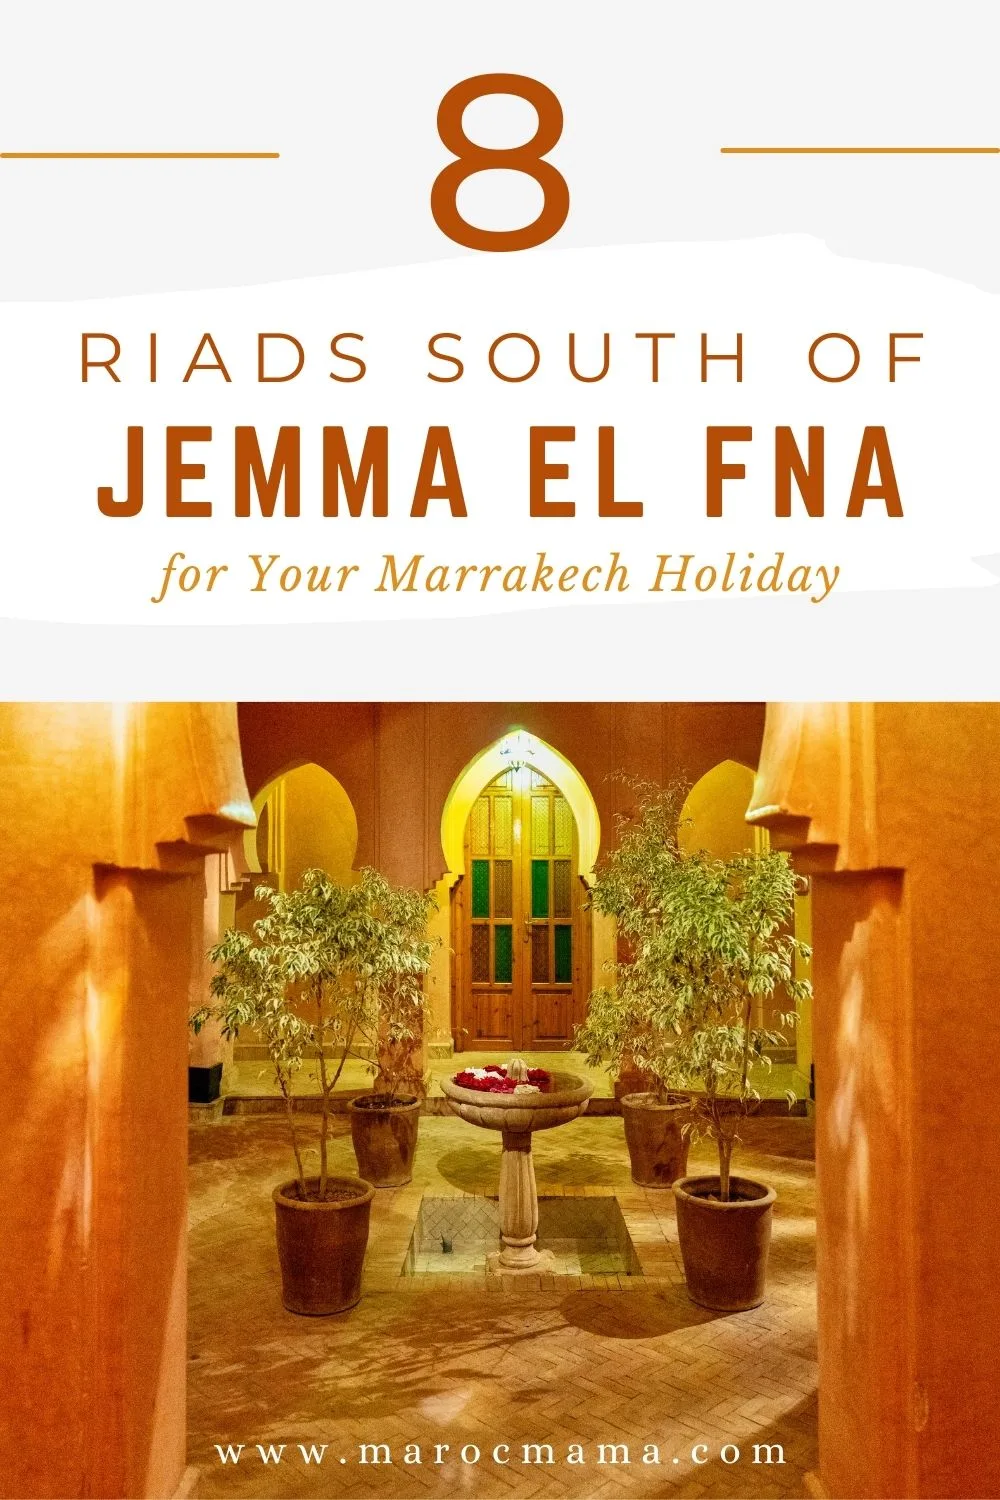 Inside a courtyard of a riad in Morocco with the text 9 Riads South of Jemma el Fna for your Marrakech holiday